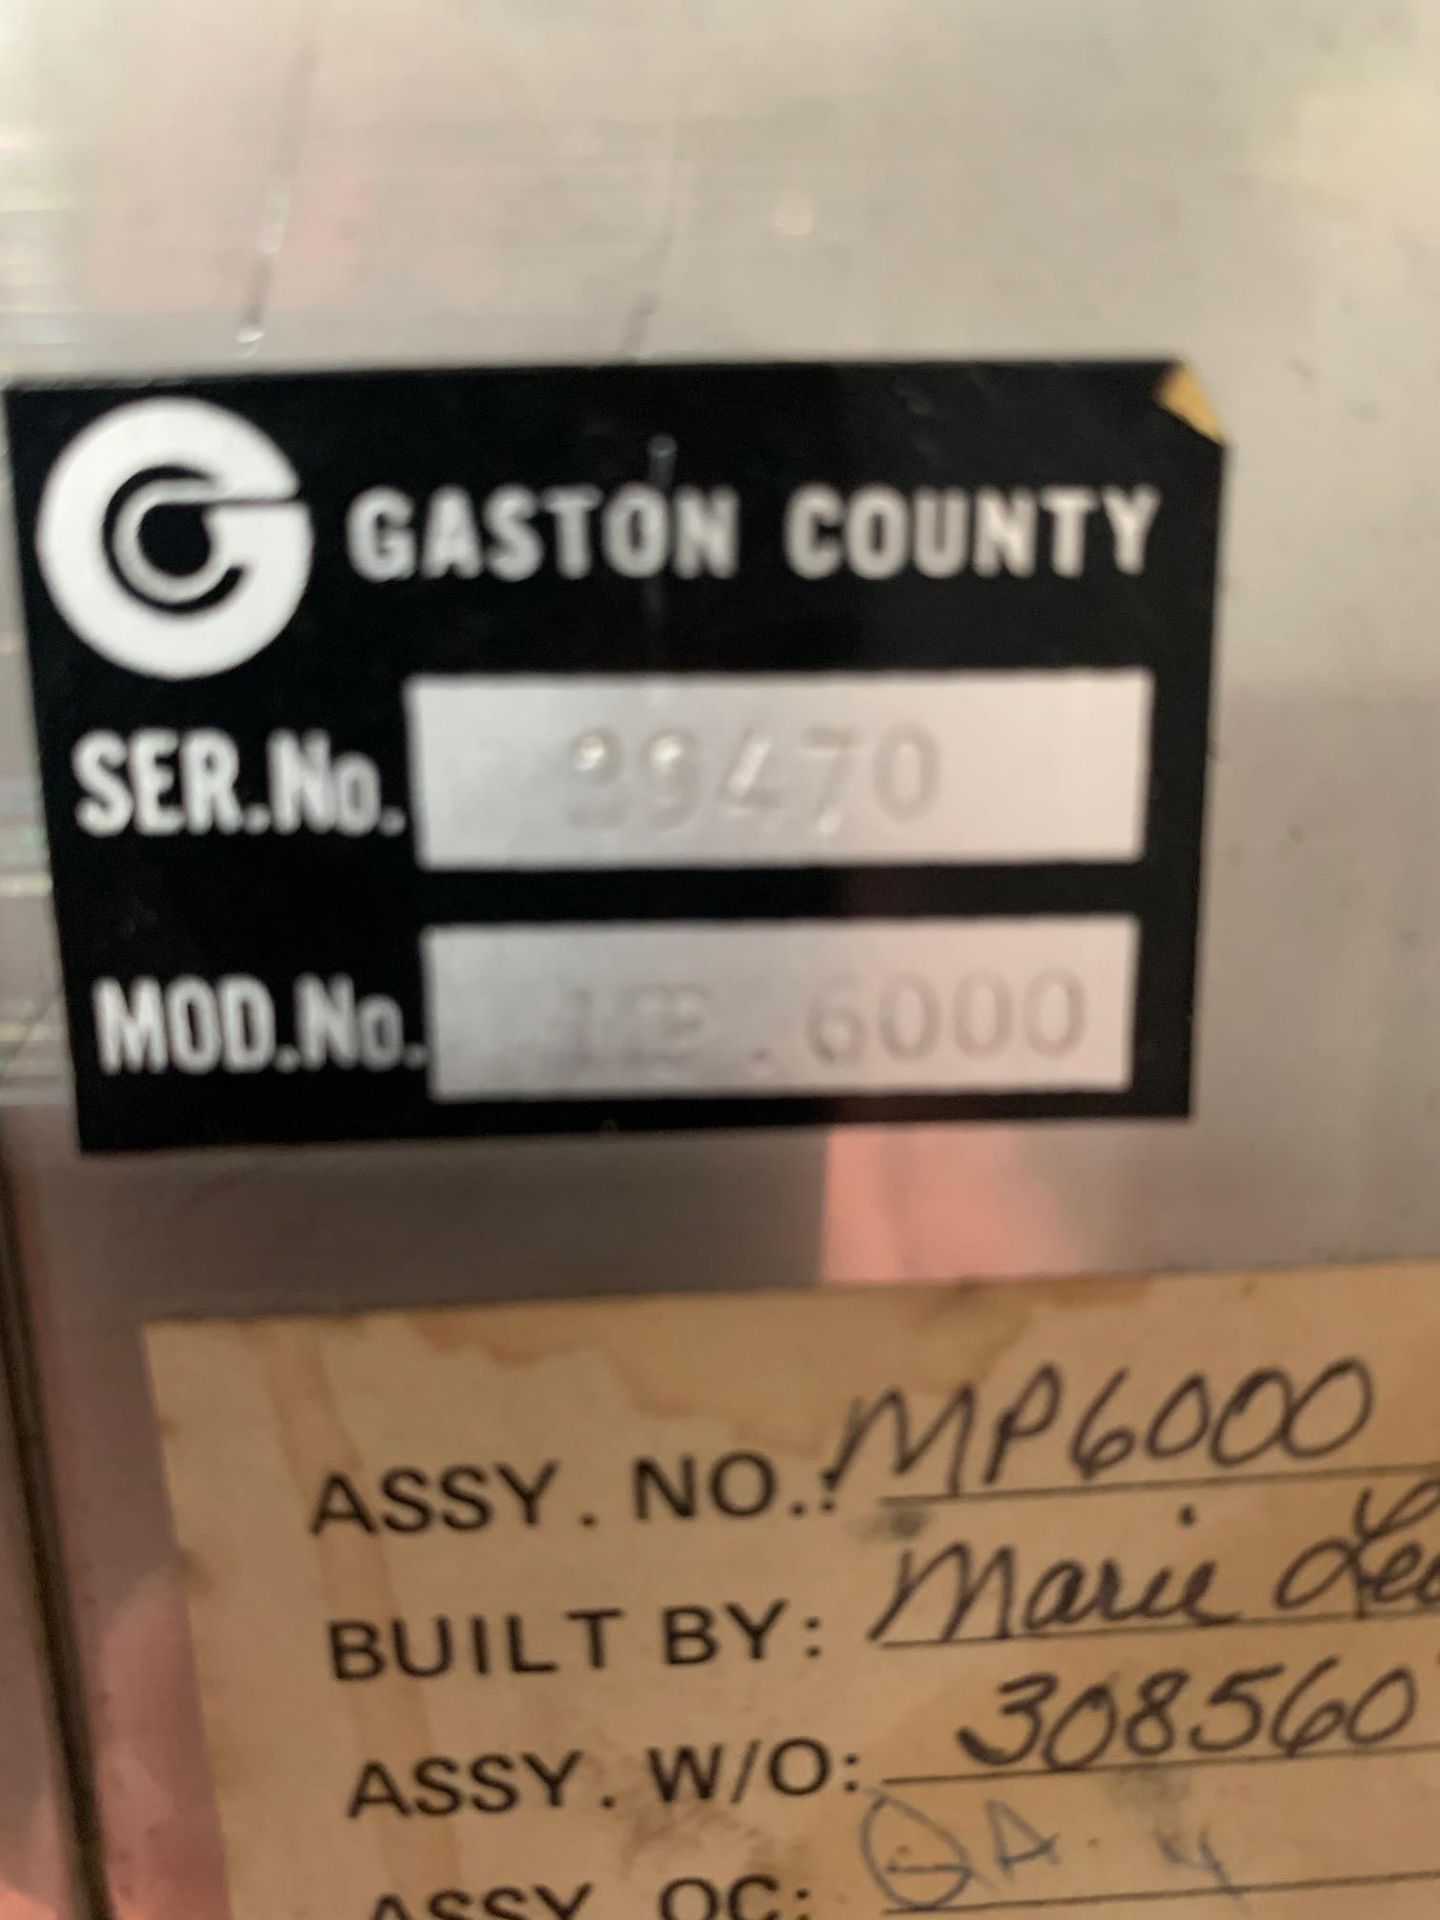 GASTON COUNTY Panel MP 6000 serial 99470 Assembly W/o 308560 - Two Panels, Rigging Fee: $25 - Image 10 of 10